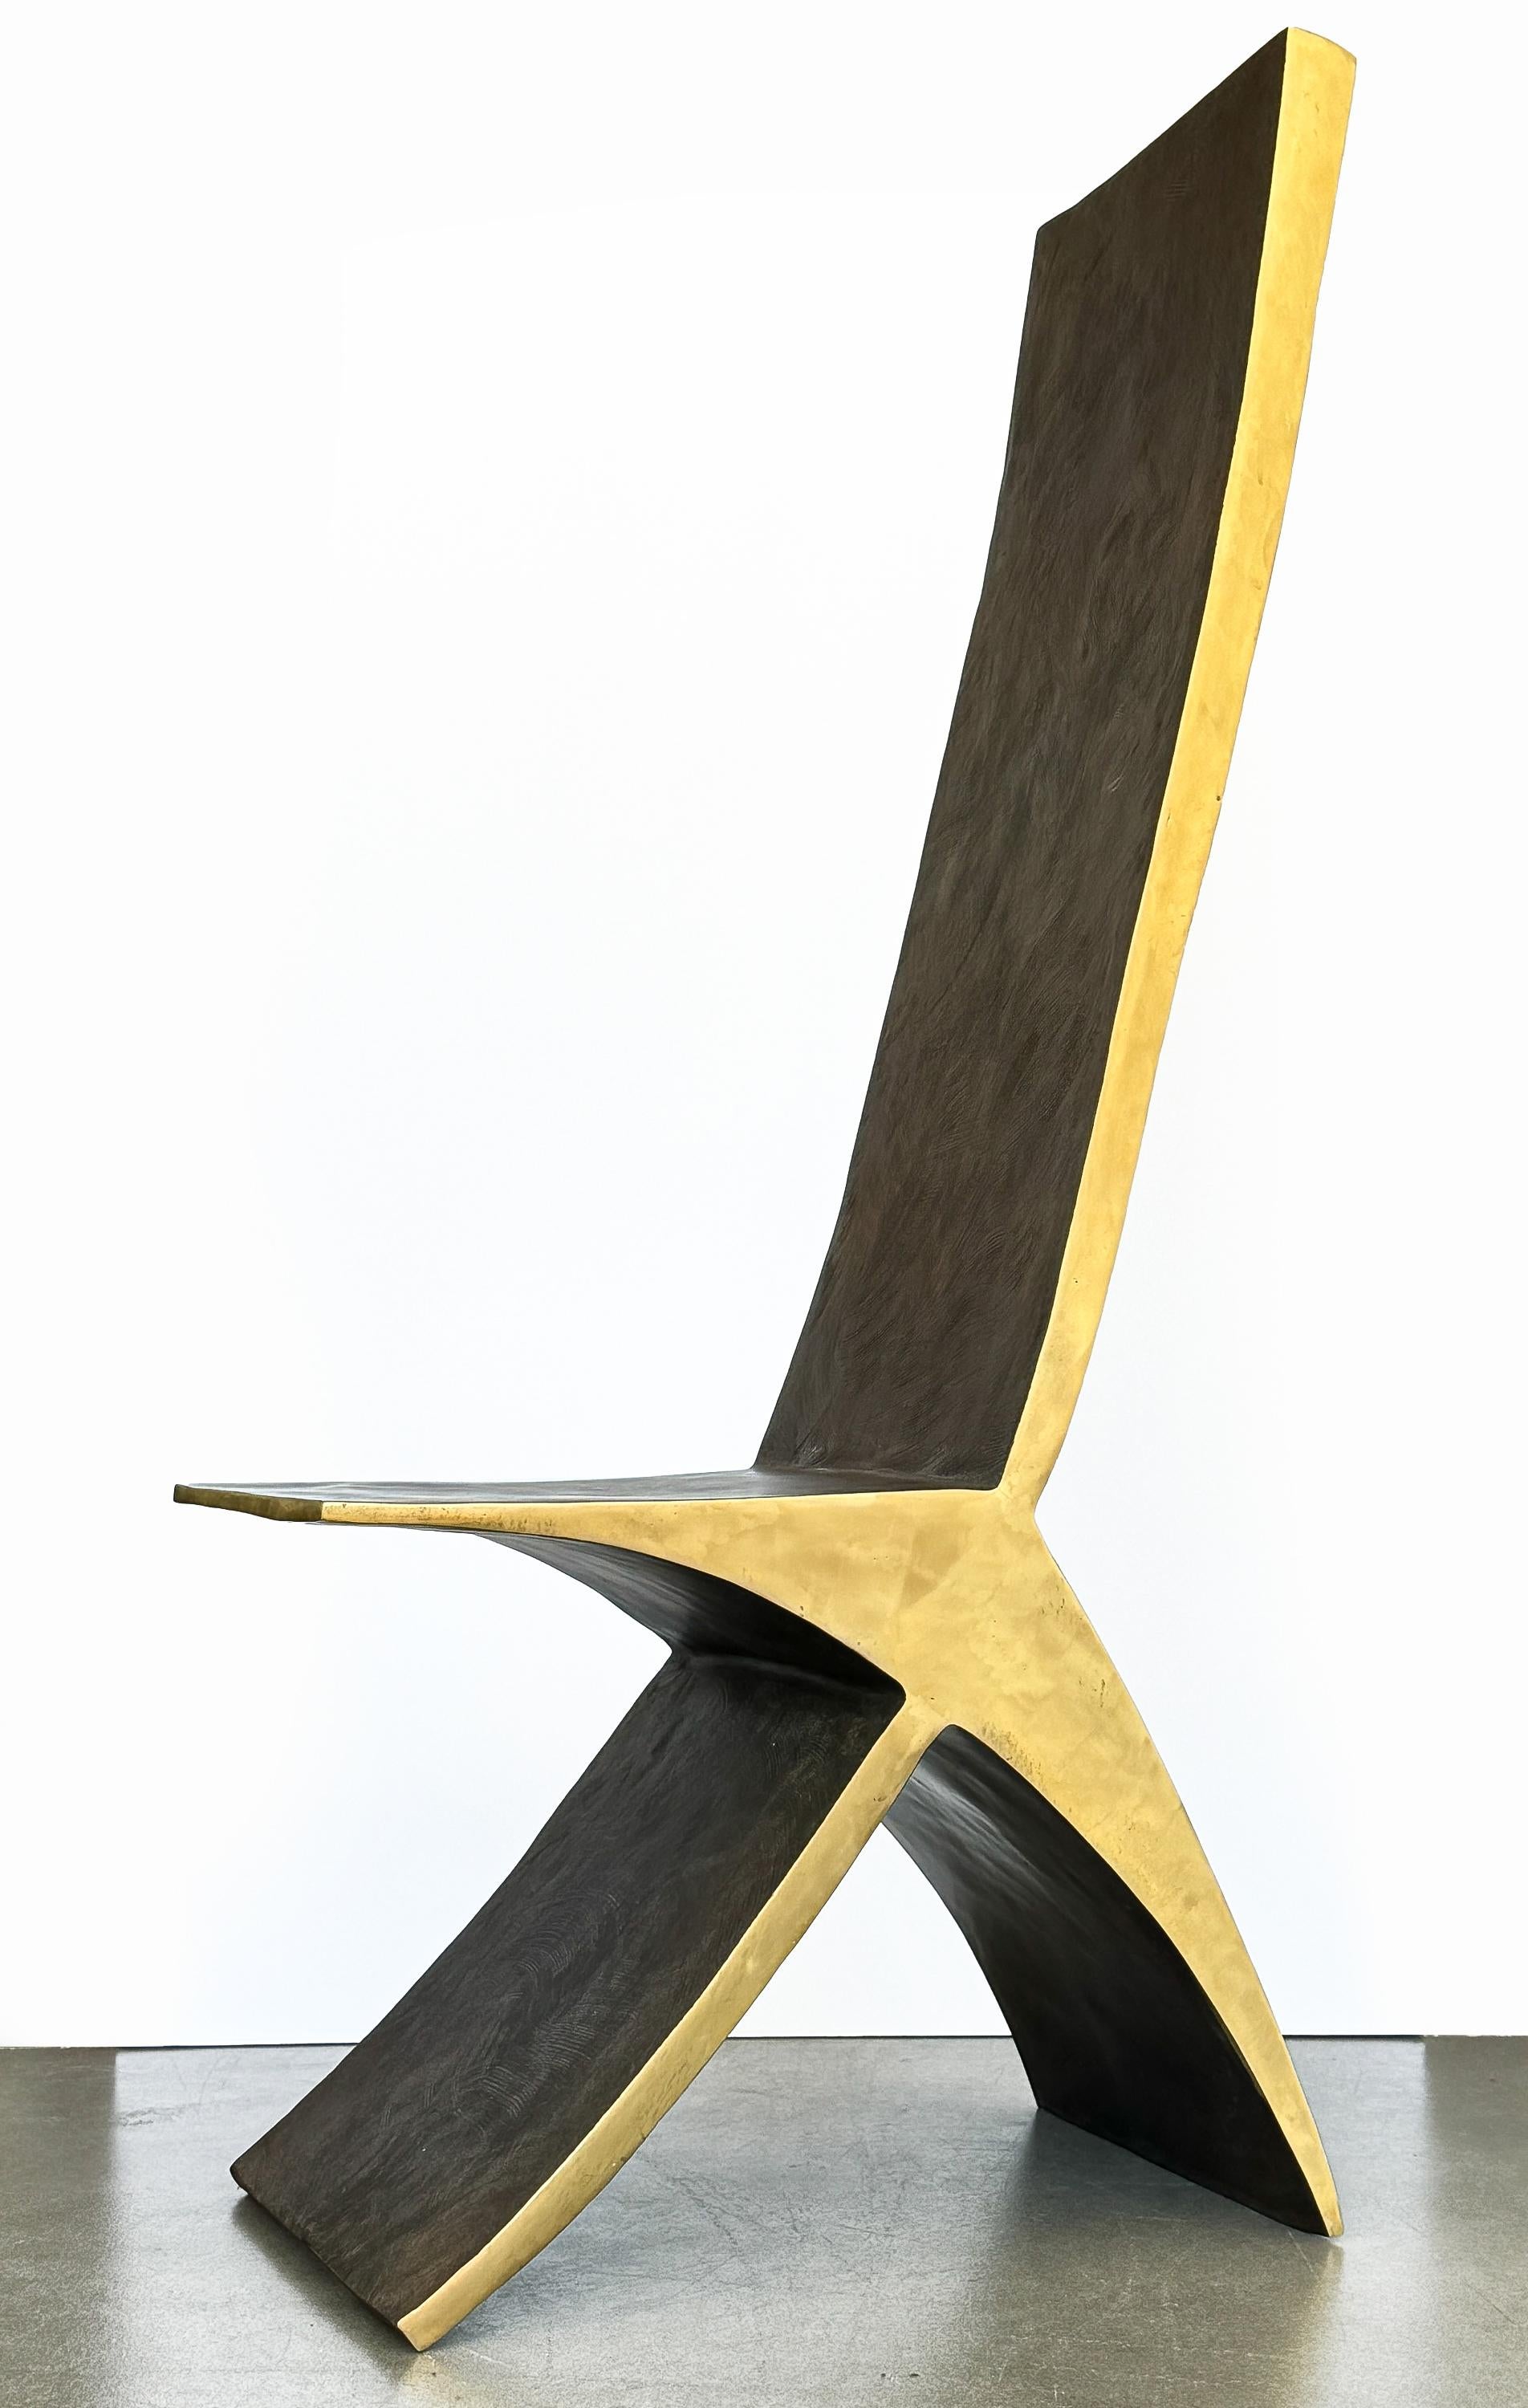 Hand-Crafted Sculptural Bronze Chair by James Vilona For Sale